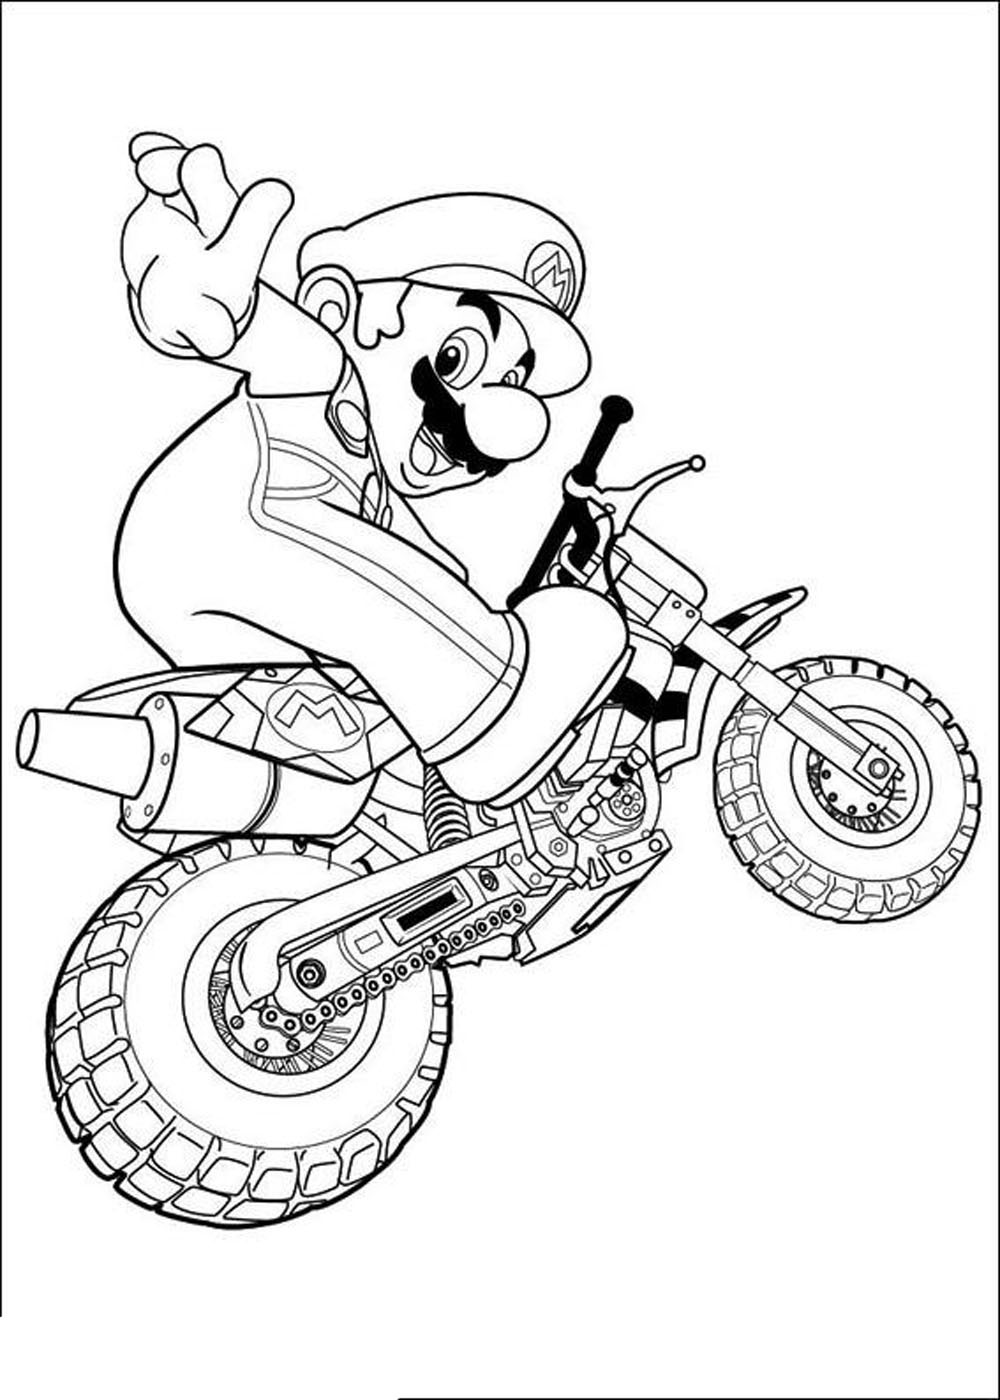 coloring pages of mario kart wii jimbo39s coloring pages mario kart wii coloring pages pages coloring mario wii of kart 